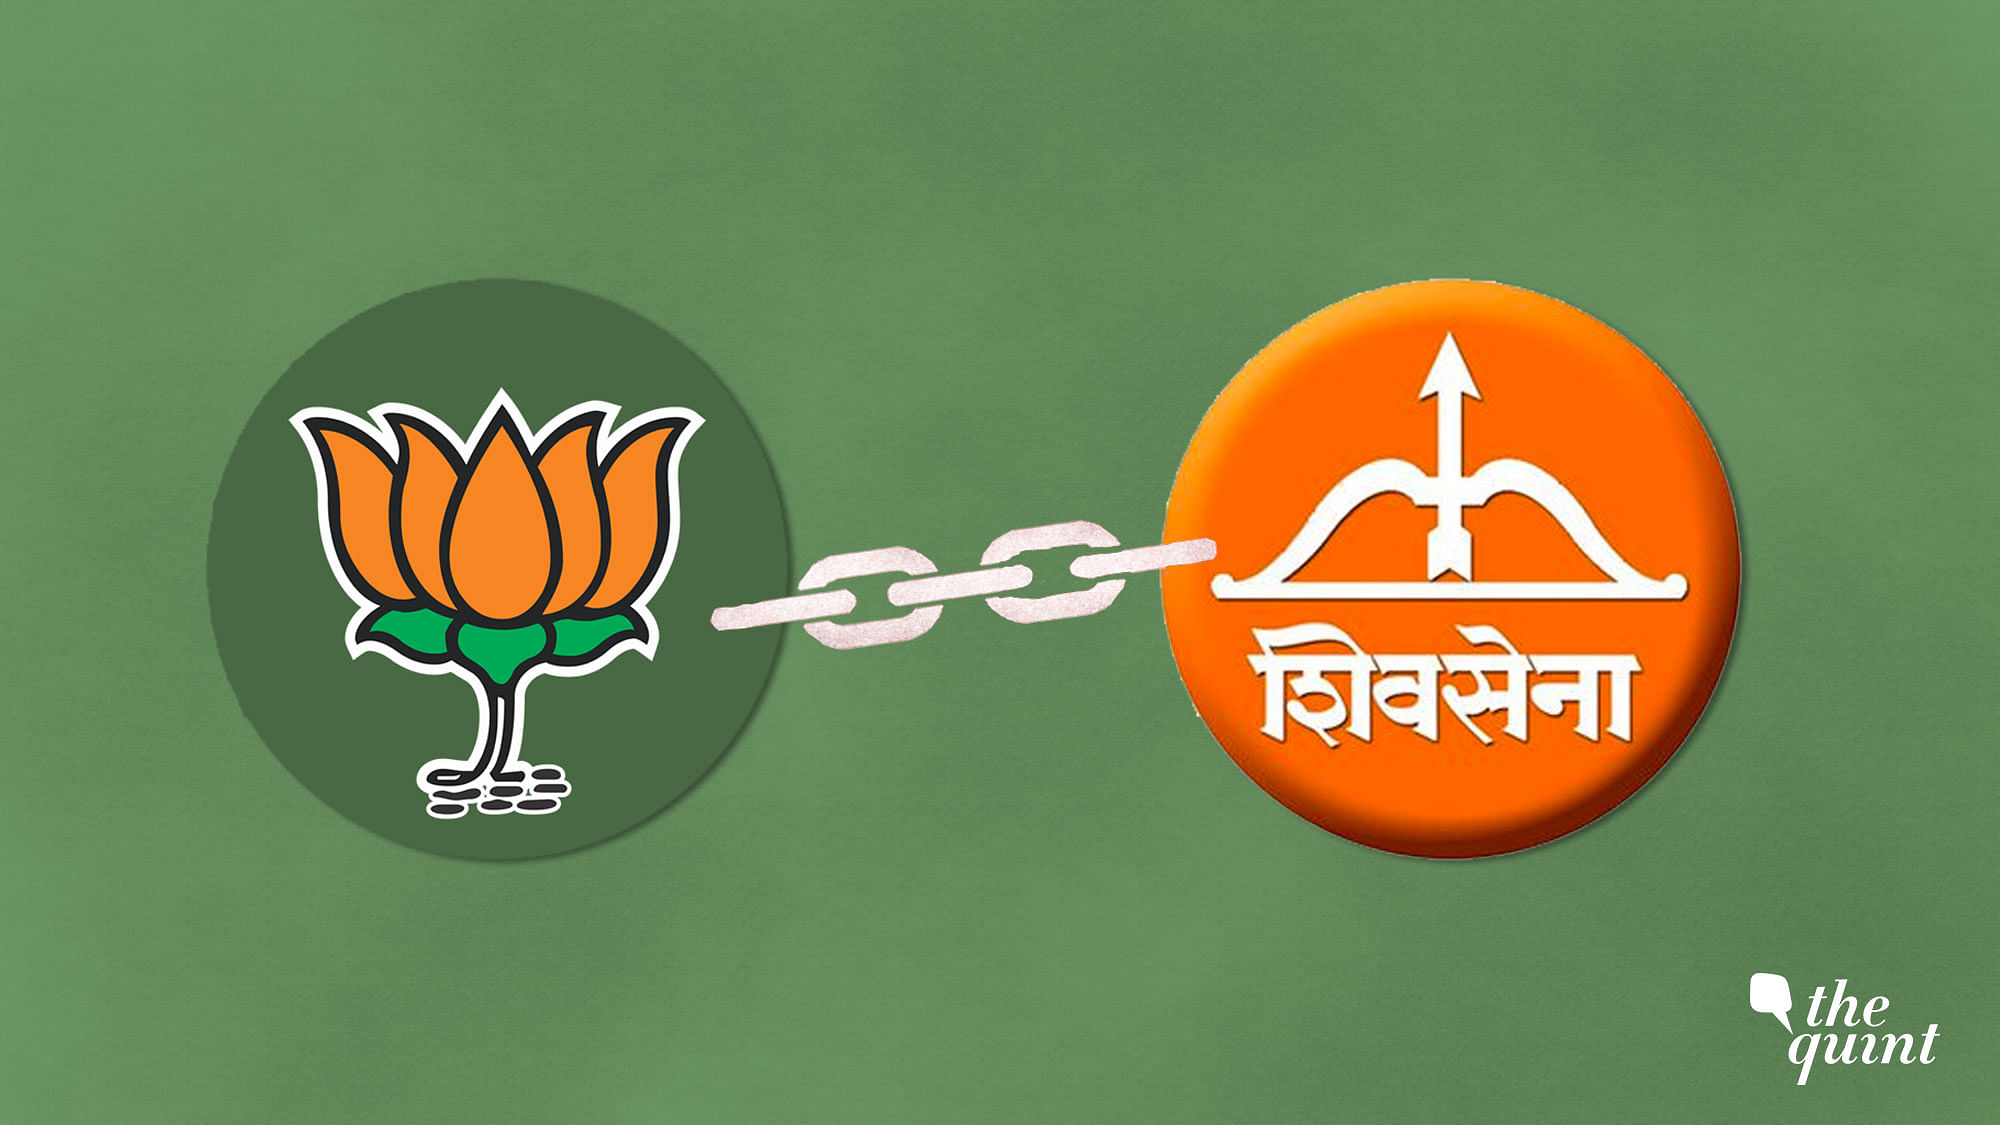 Despite all their differences, both the BJP and the Shiv Sena need each other to survive polls in Maharashtra.&nbsp;